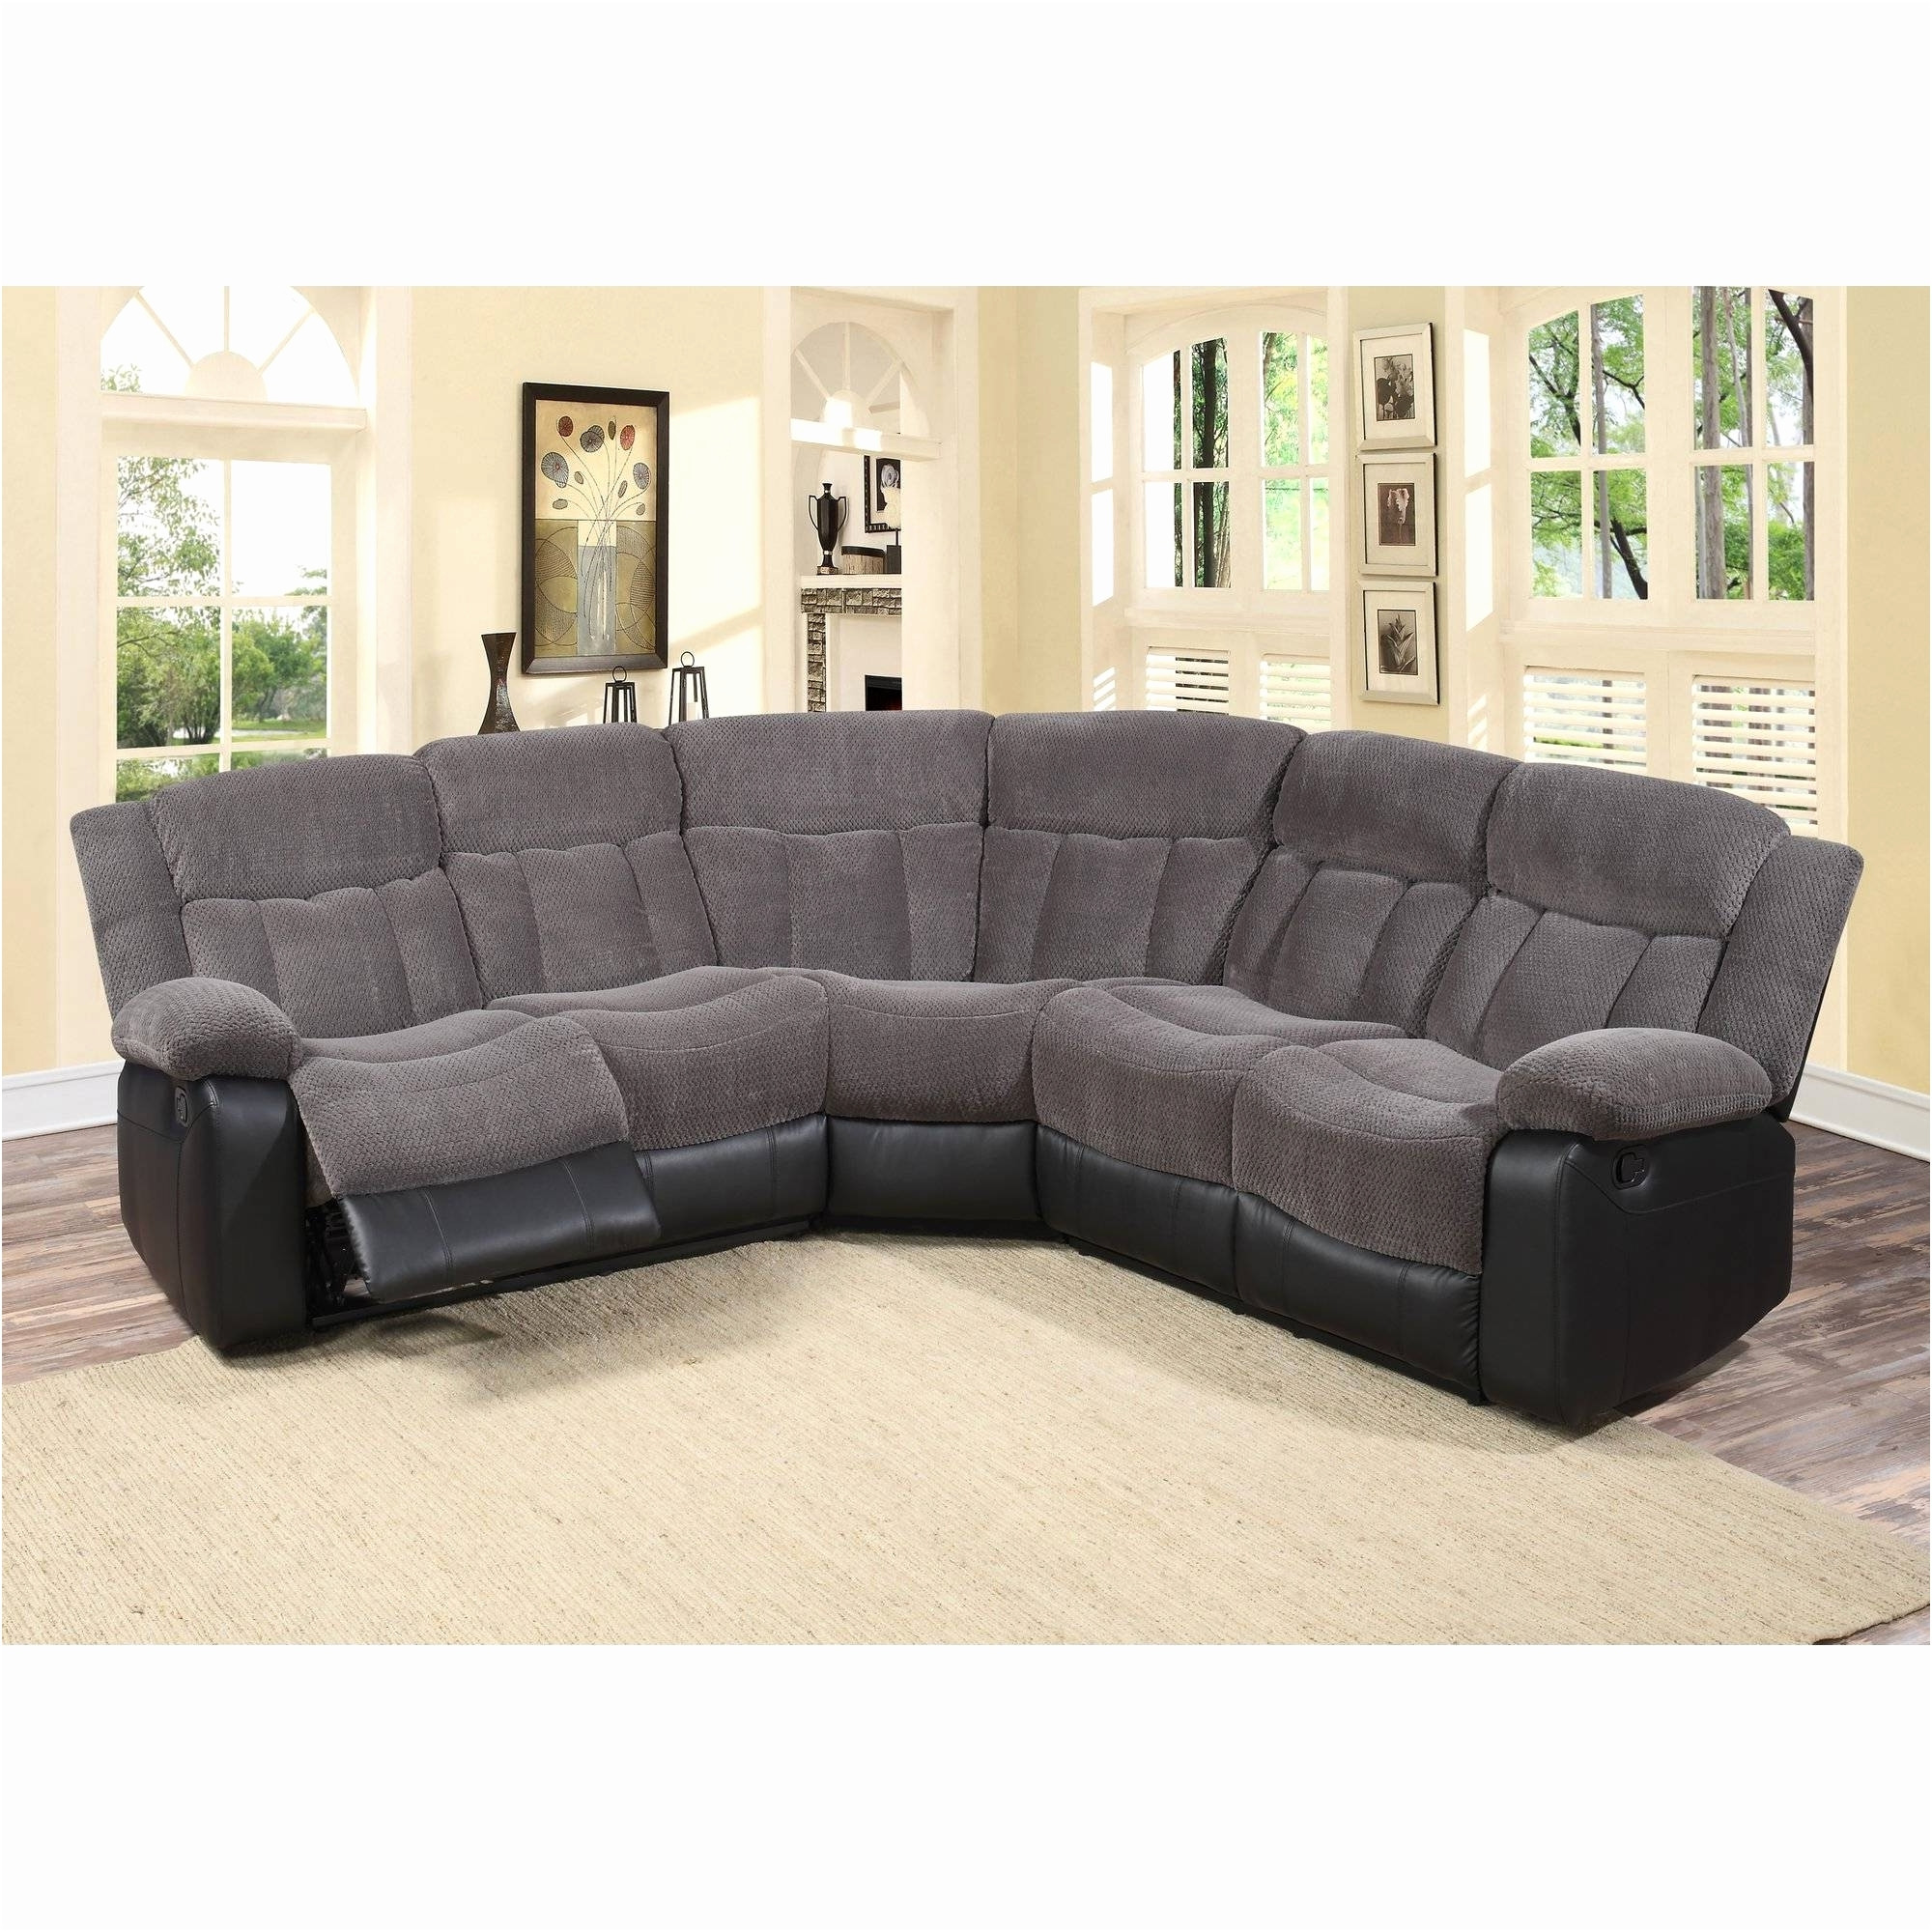 Best ideas about Sofa And Loveseat Set Under 600
. Save or Pin Brilliant Sectional Sofas Under 600 Buildsimplehome Now.